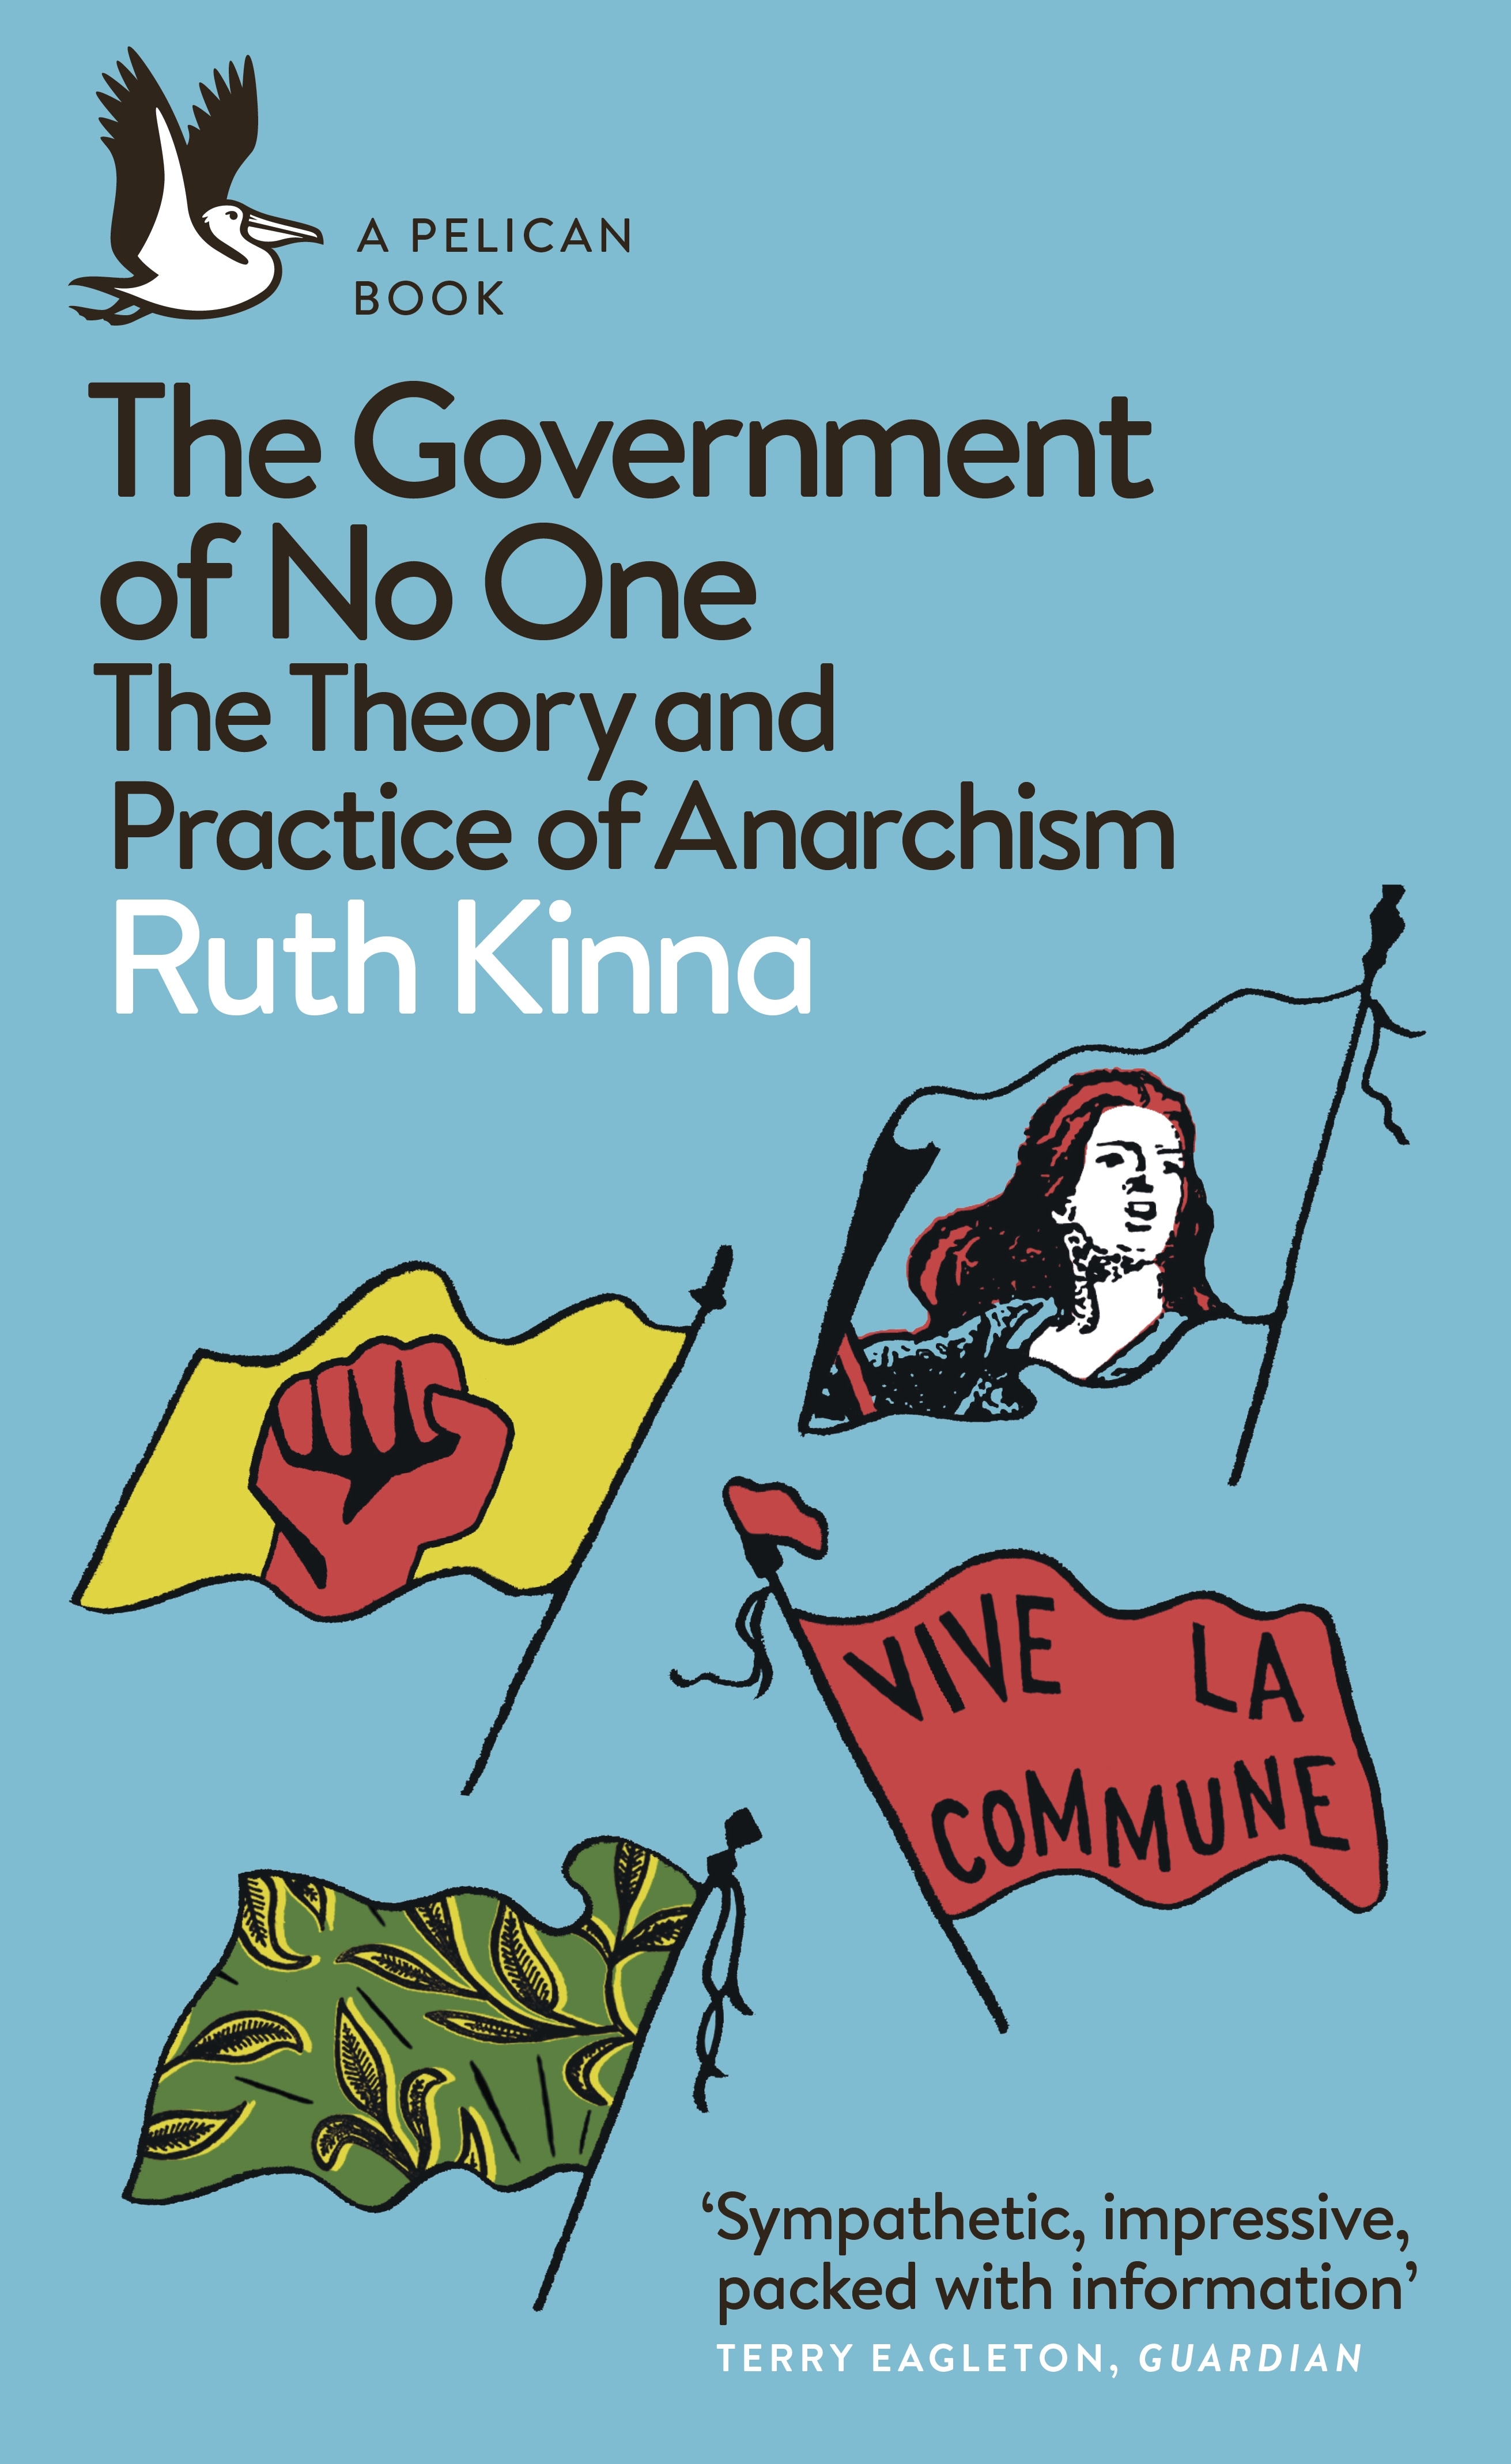 Book “The Government of No One” by Ruth Kinna — August 6, 2020